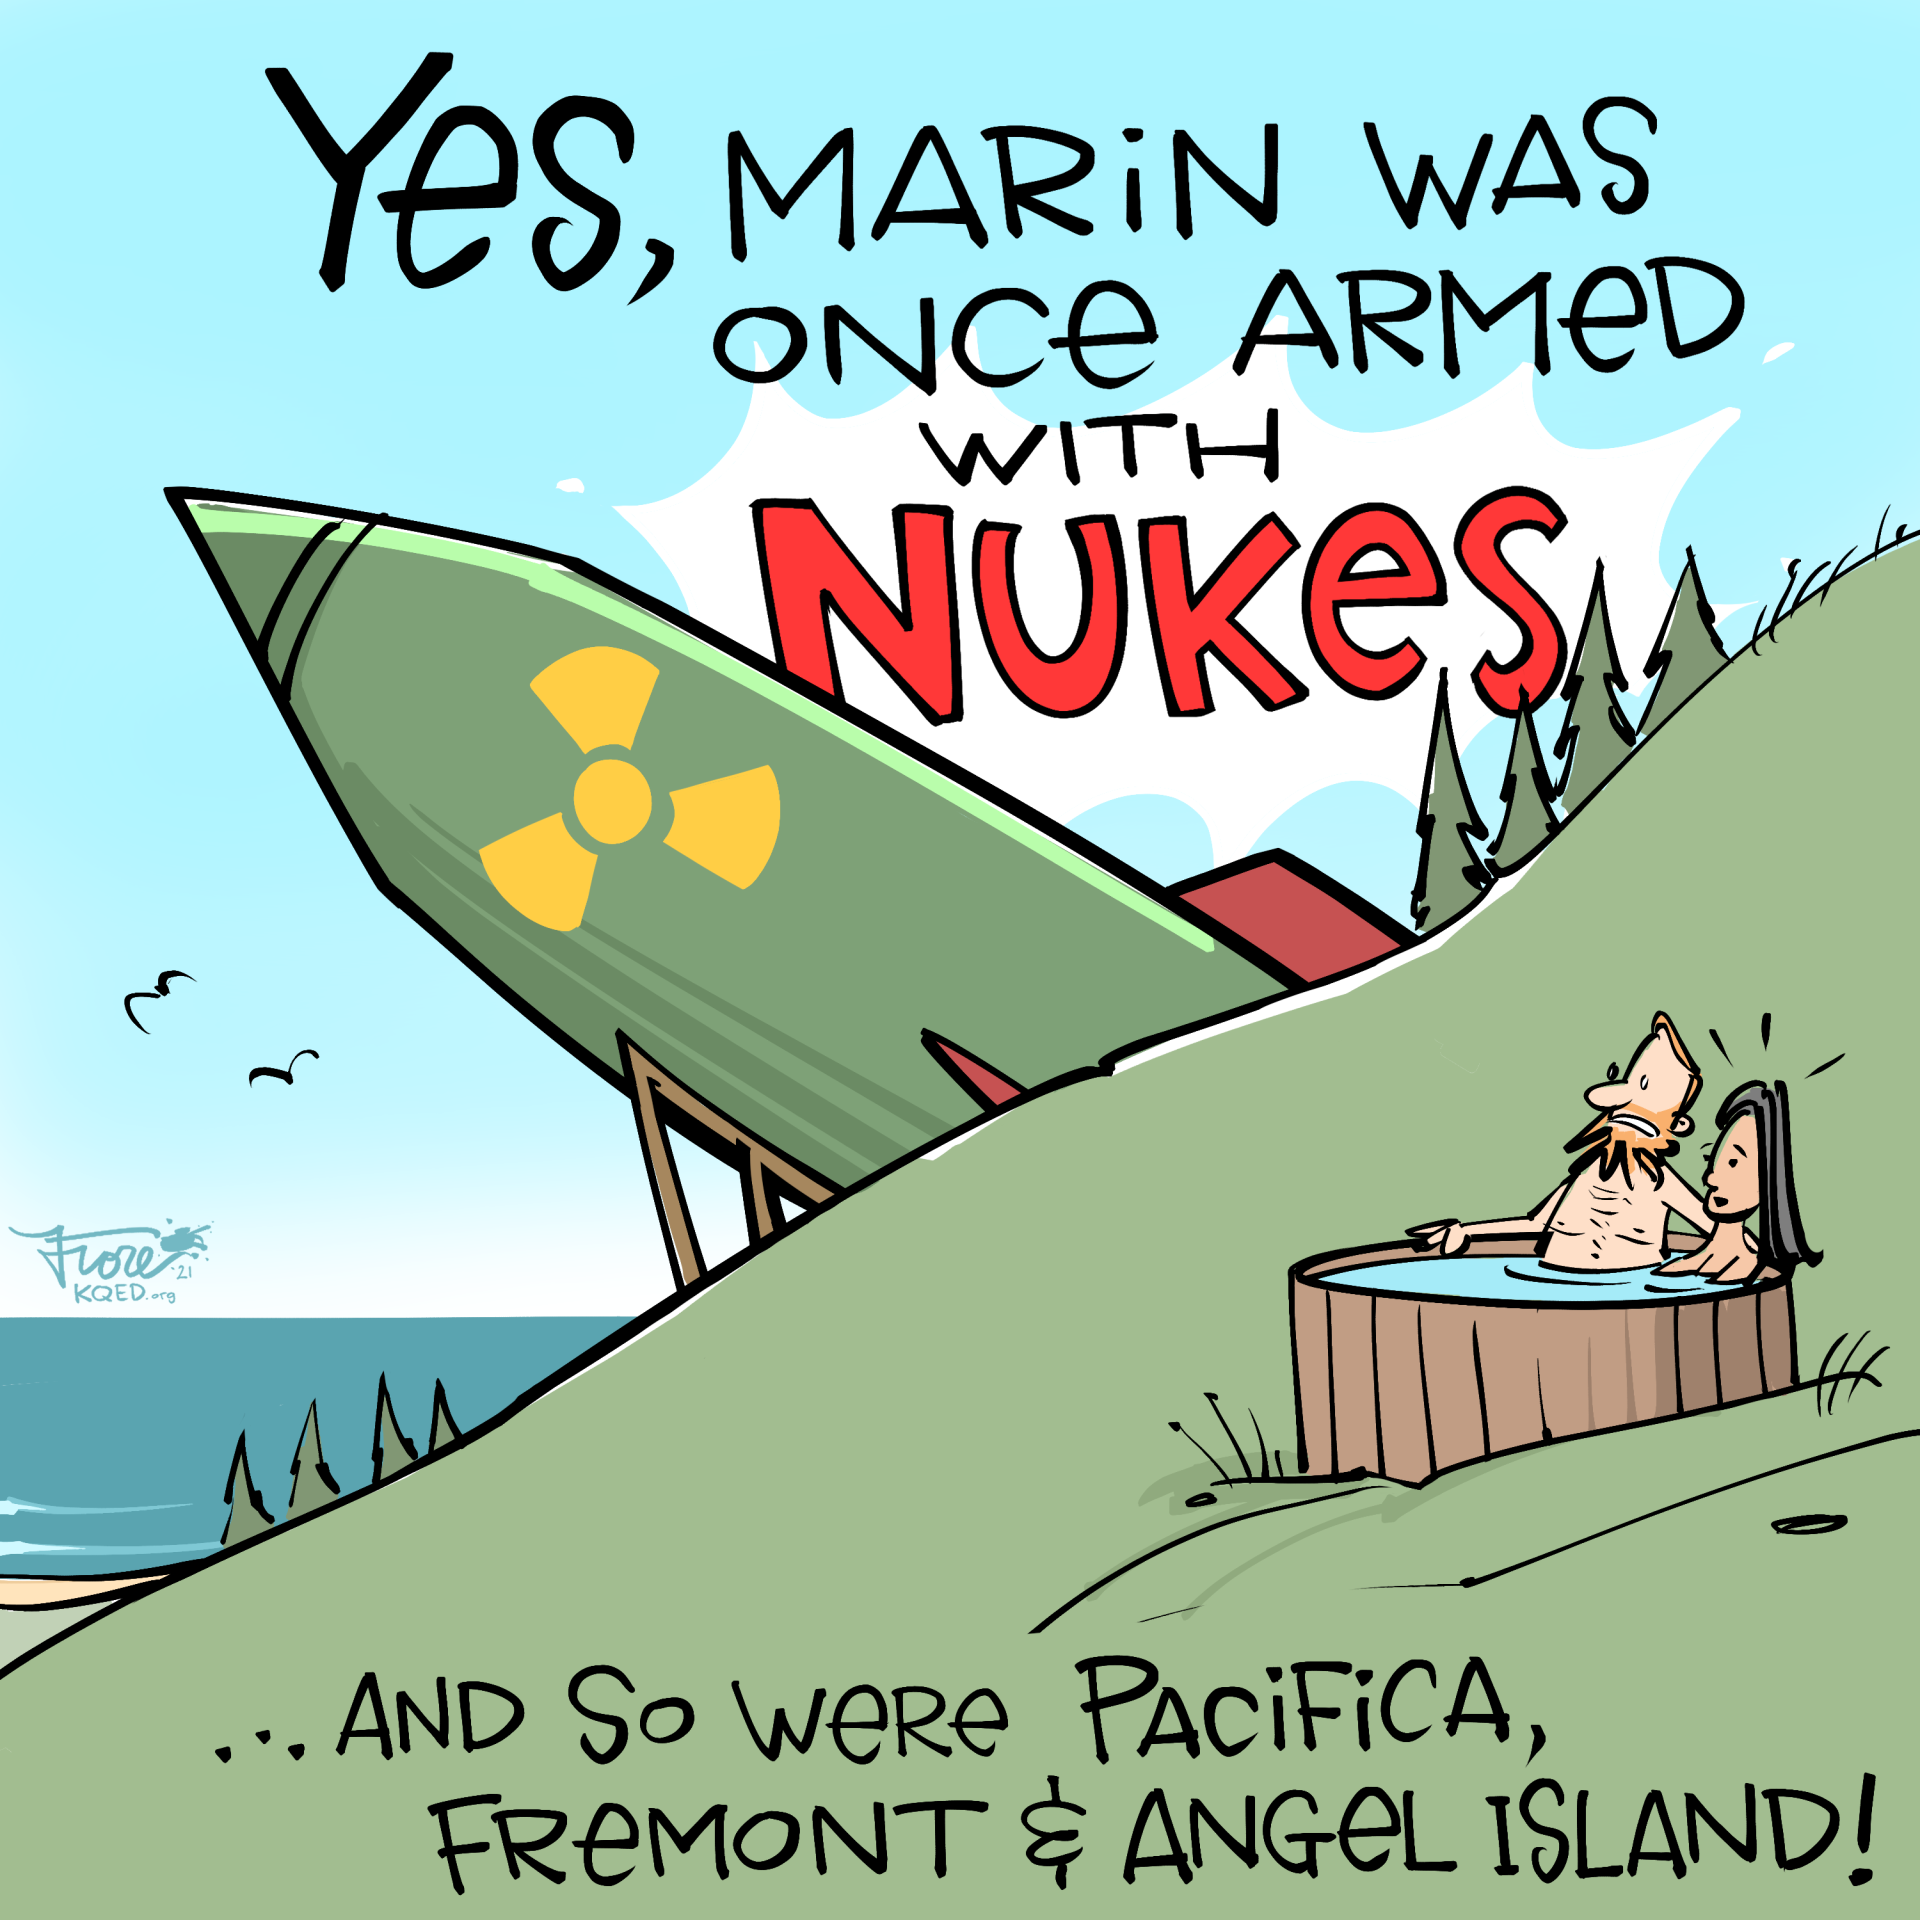 Cartoon: a huge nuclear missile on a hillside over the ocean as two surprised people sit in a hot tub together. Caption reads, "yes, Marin was once armed with nukes... and so were Pacifica, Fremont & Angel Island!"